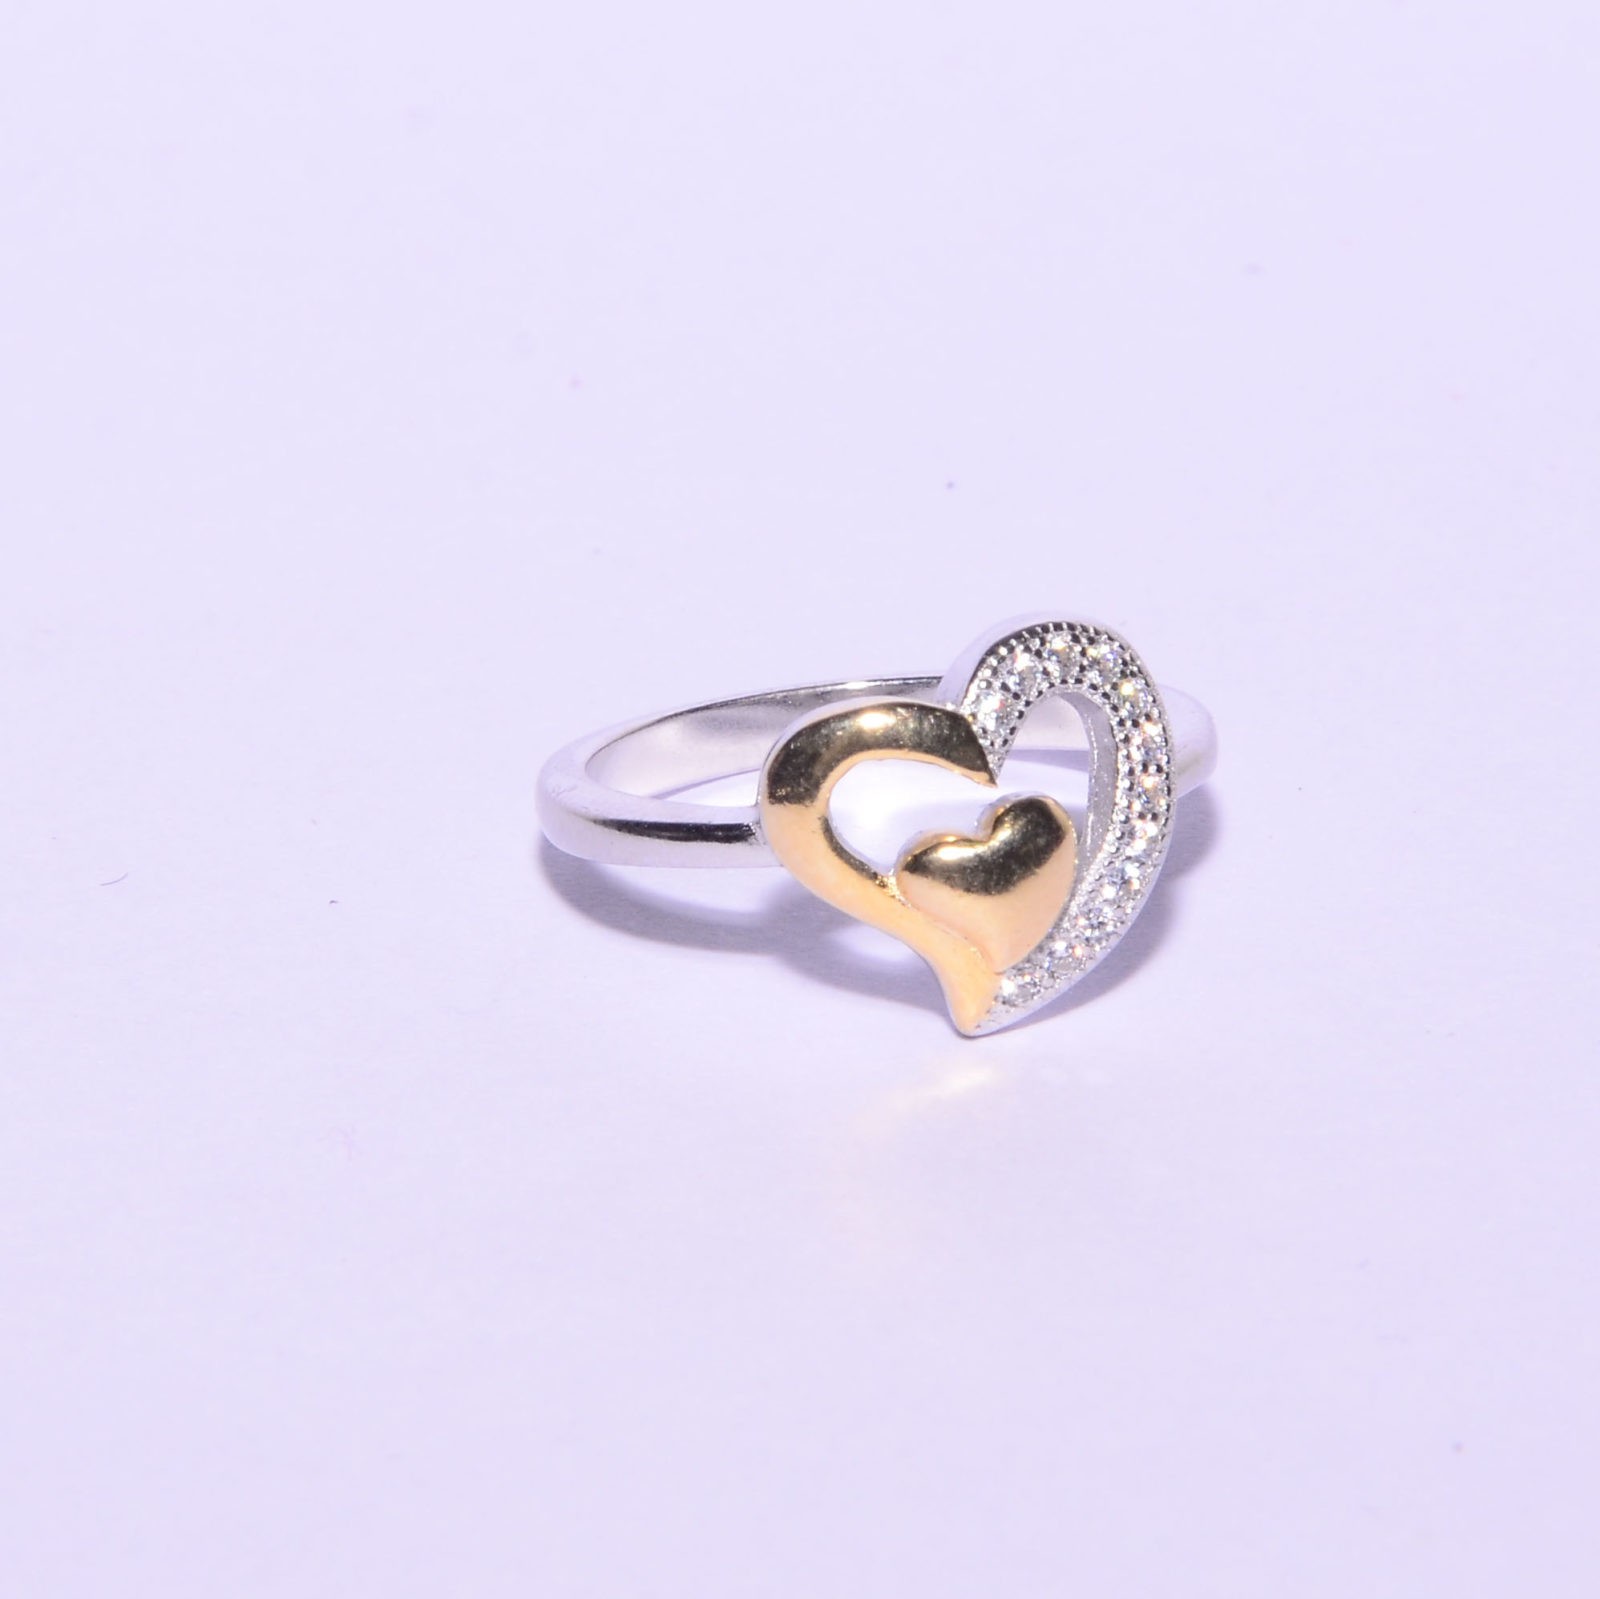 Buy quality 22k gold layering heart shape ring in Ahmedabad